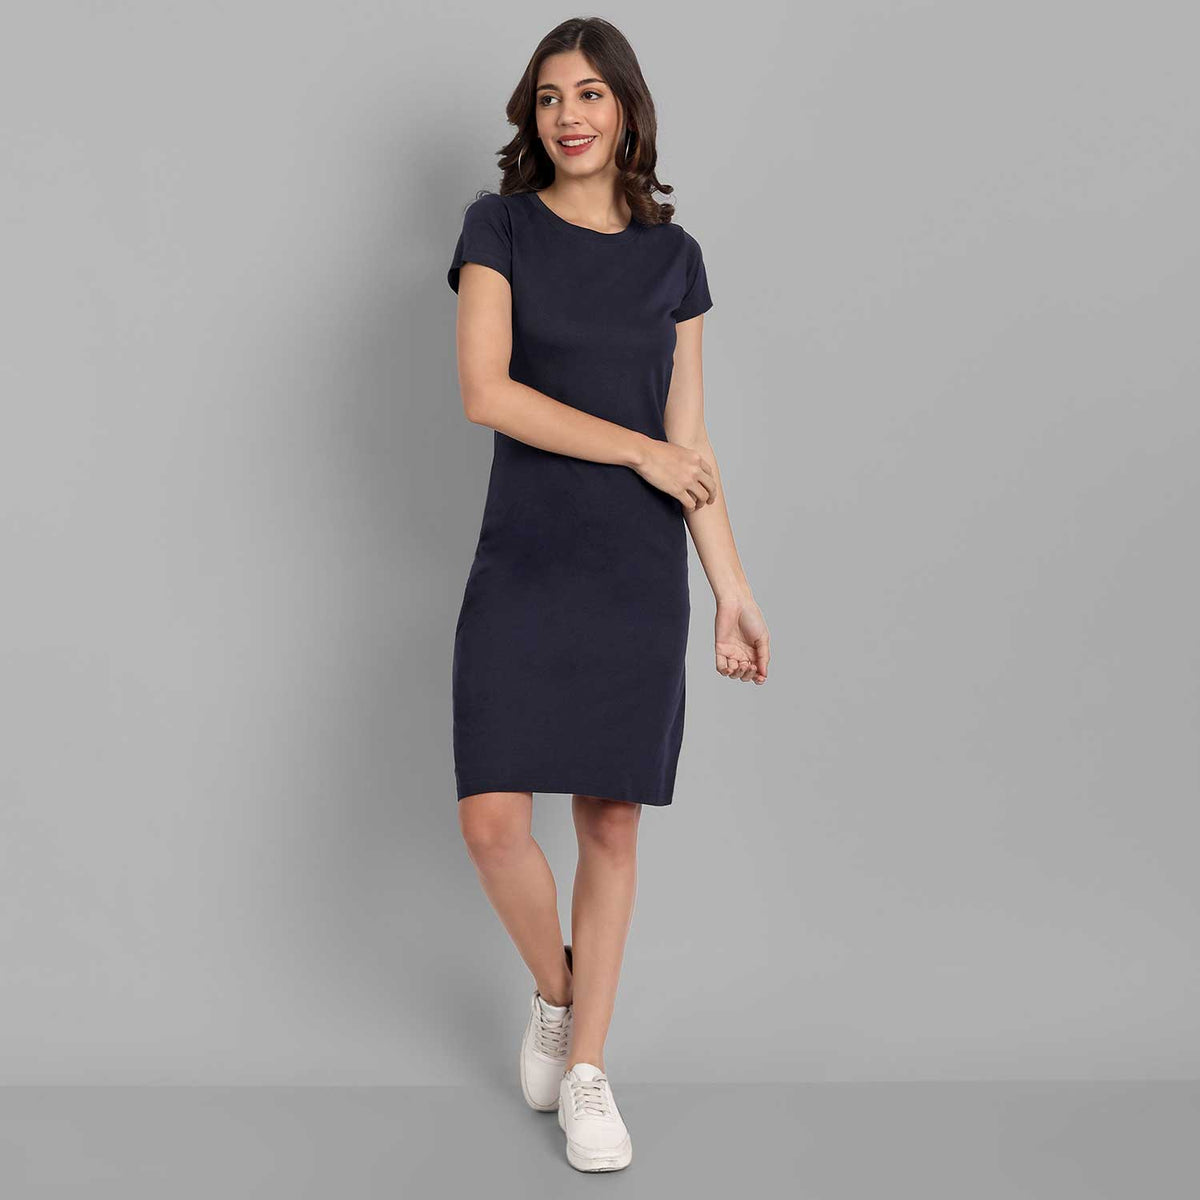 Navy Blue Dresses For Woman